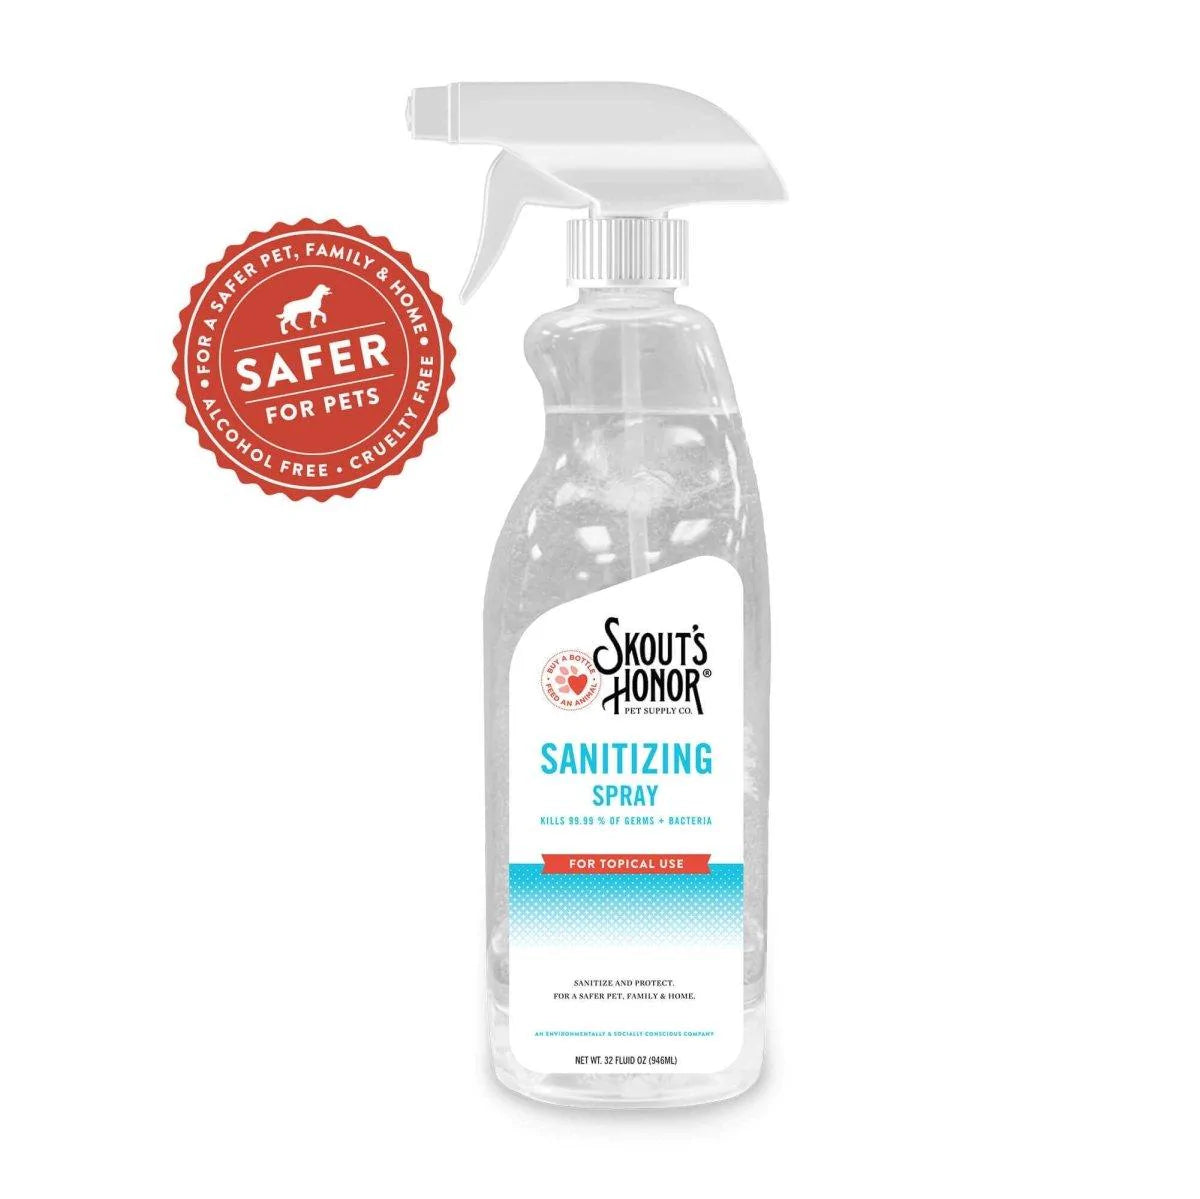 Skout's Honor Sanitizing Spray for Use on Dogs, Humans and Your Home